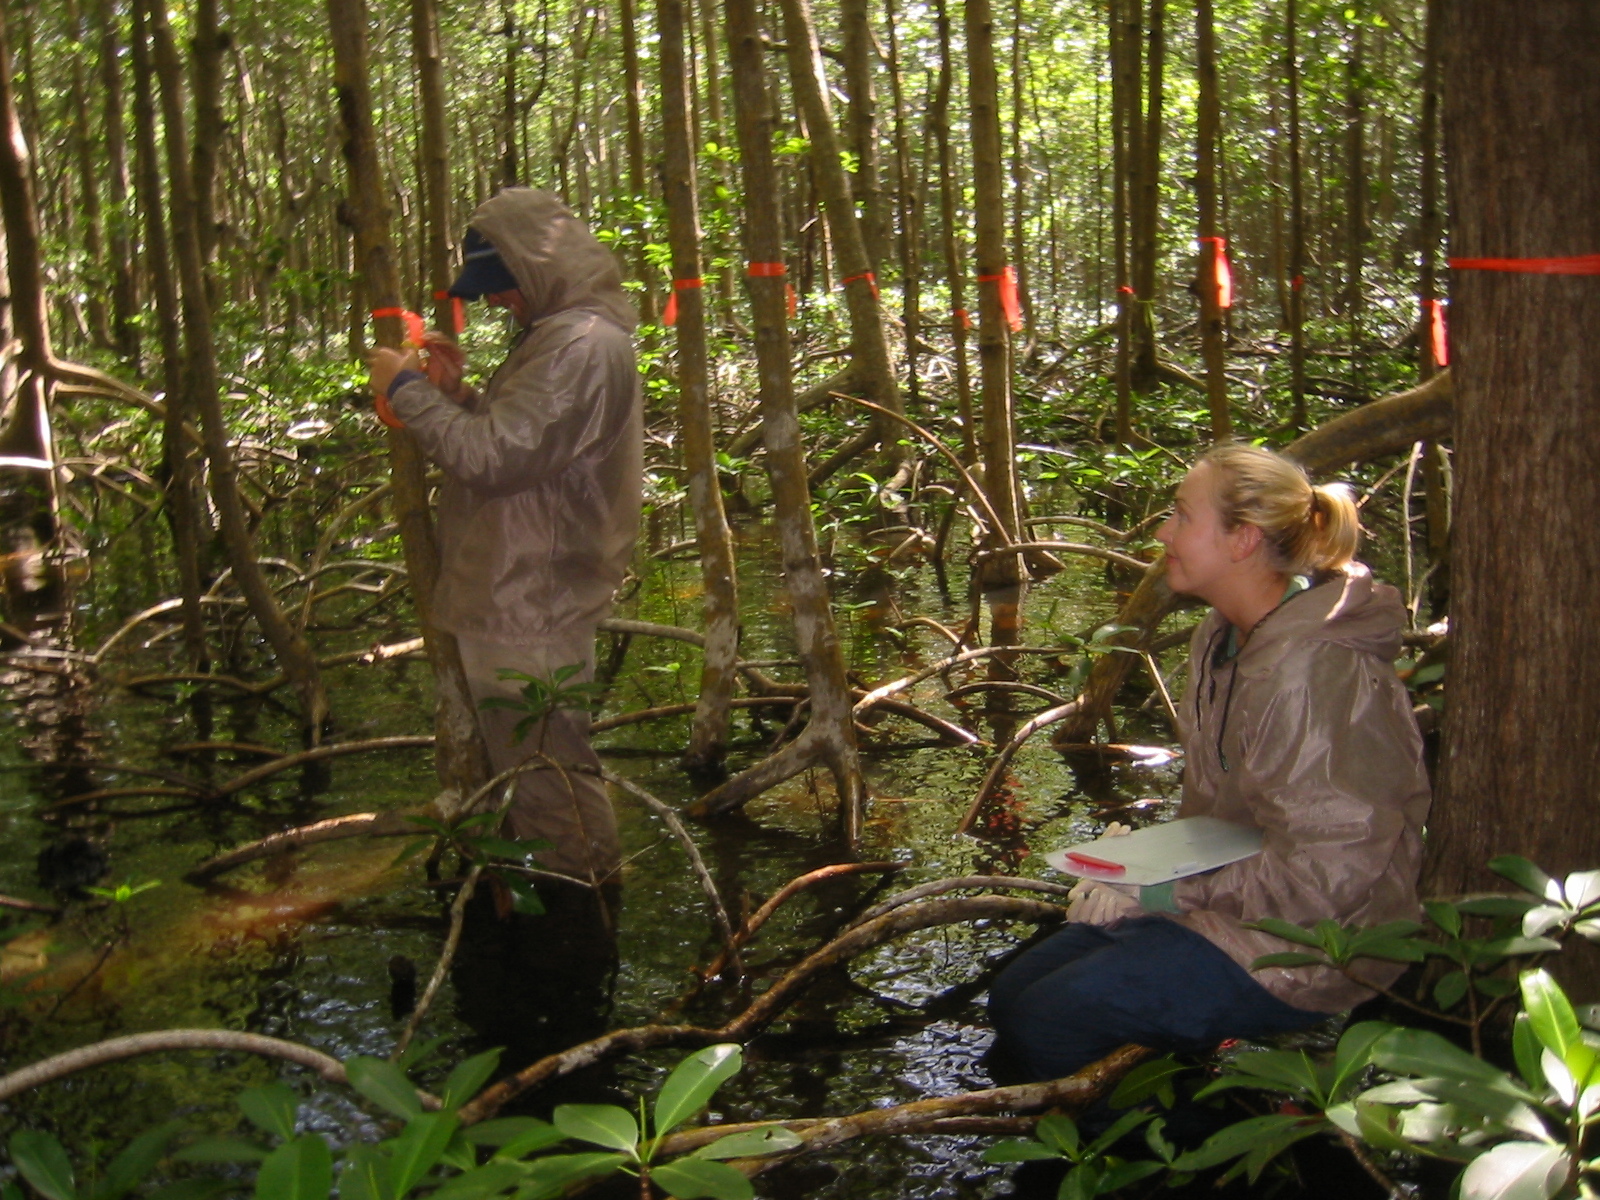 Left to right: Gustavo Rubio and Melissa Romigh measuring diameter at breast height (DBH) of mangrove trees at SRS-6 in Shark River Slough